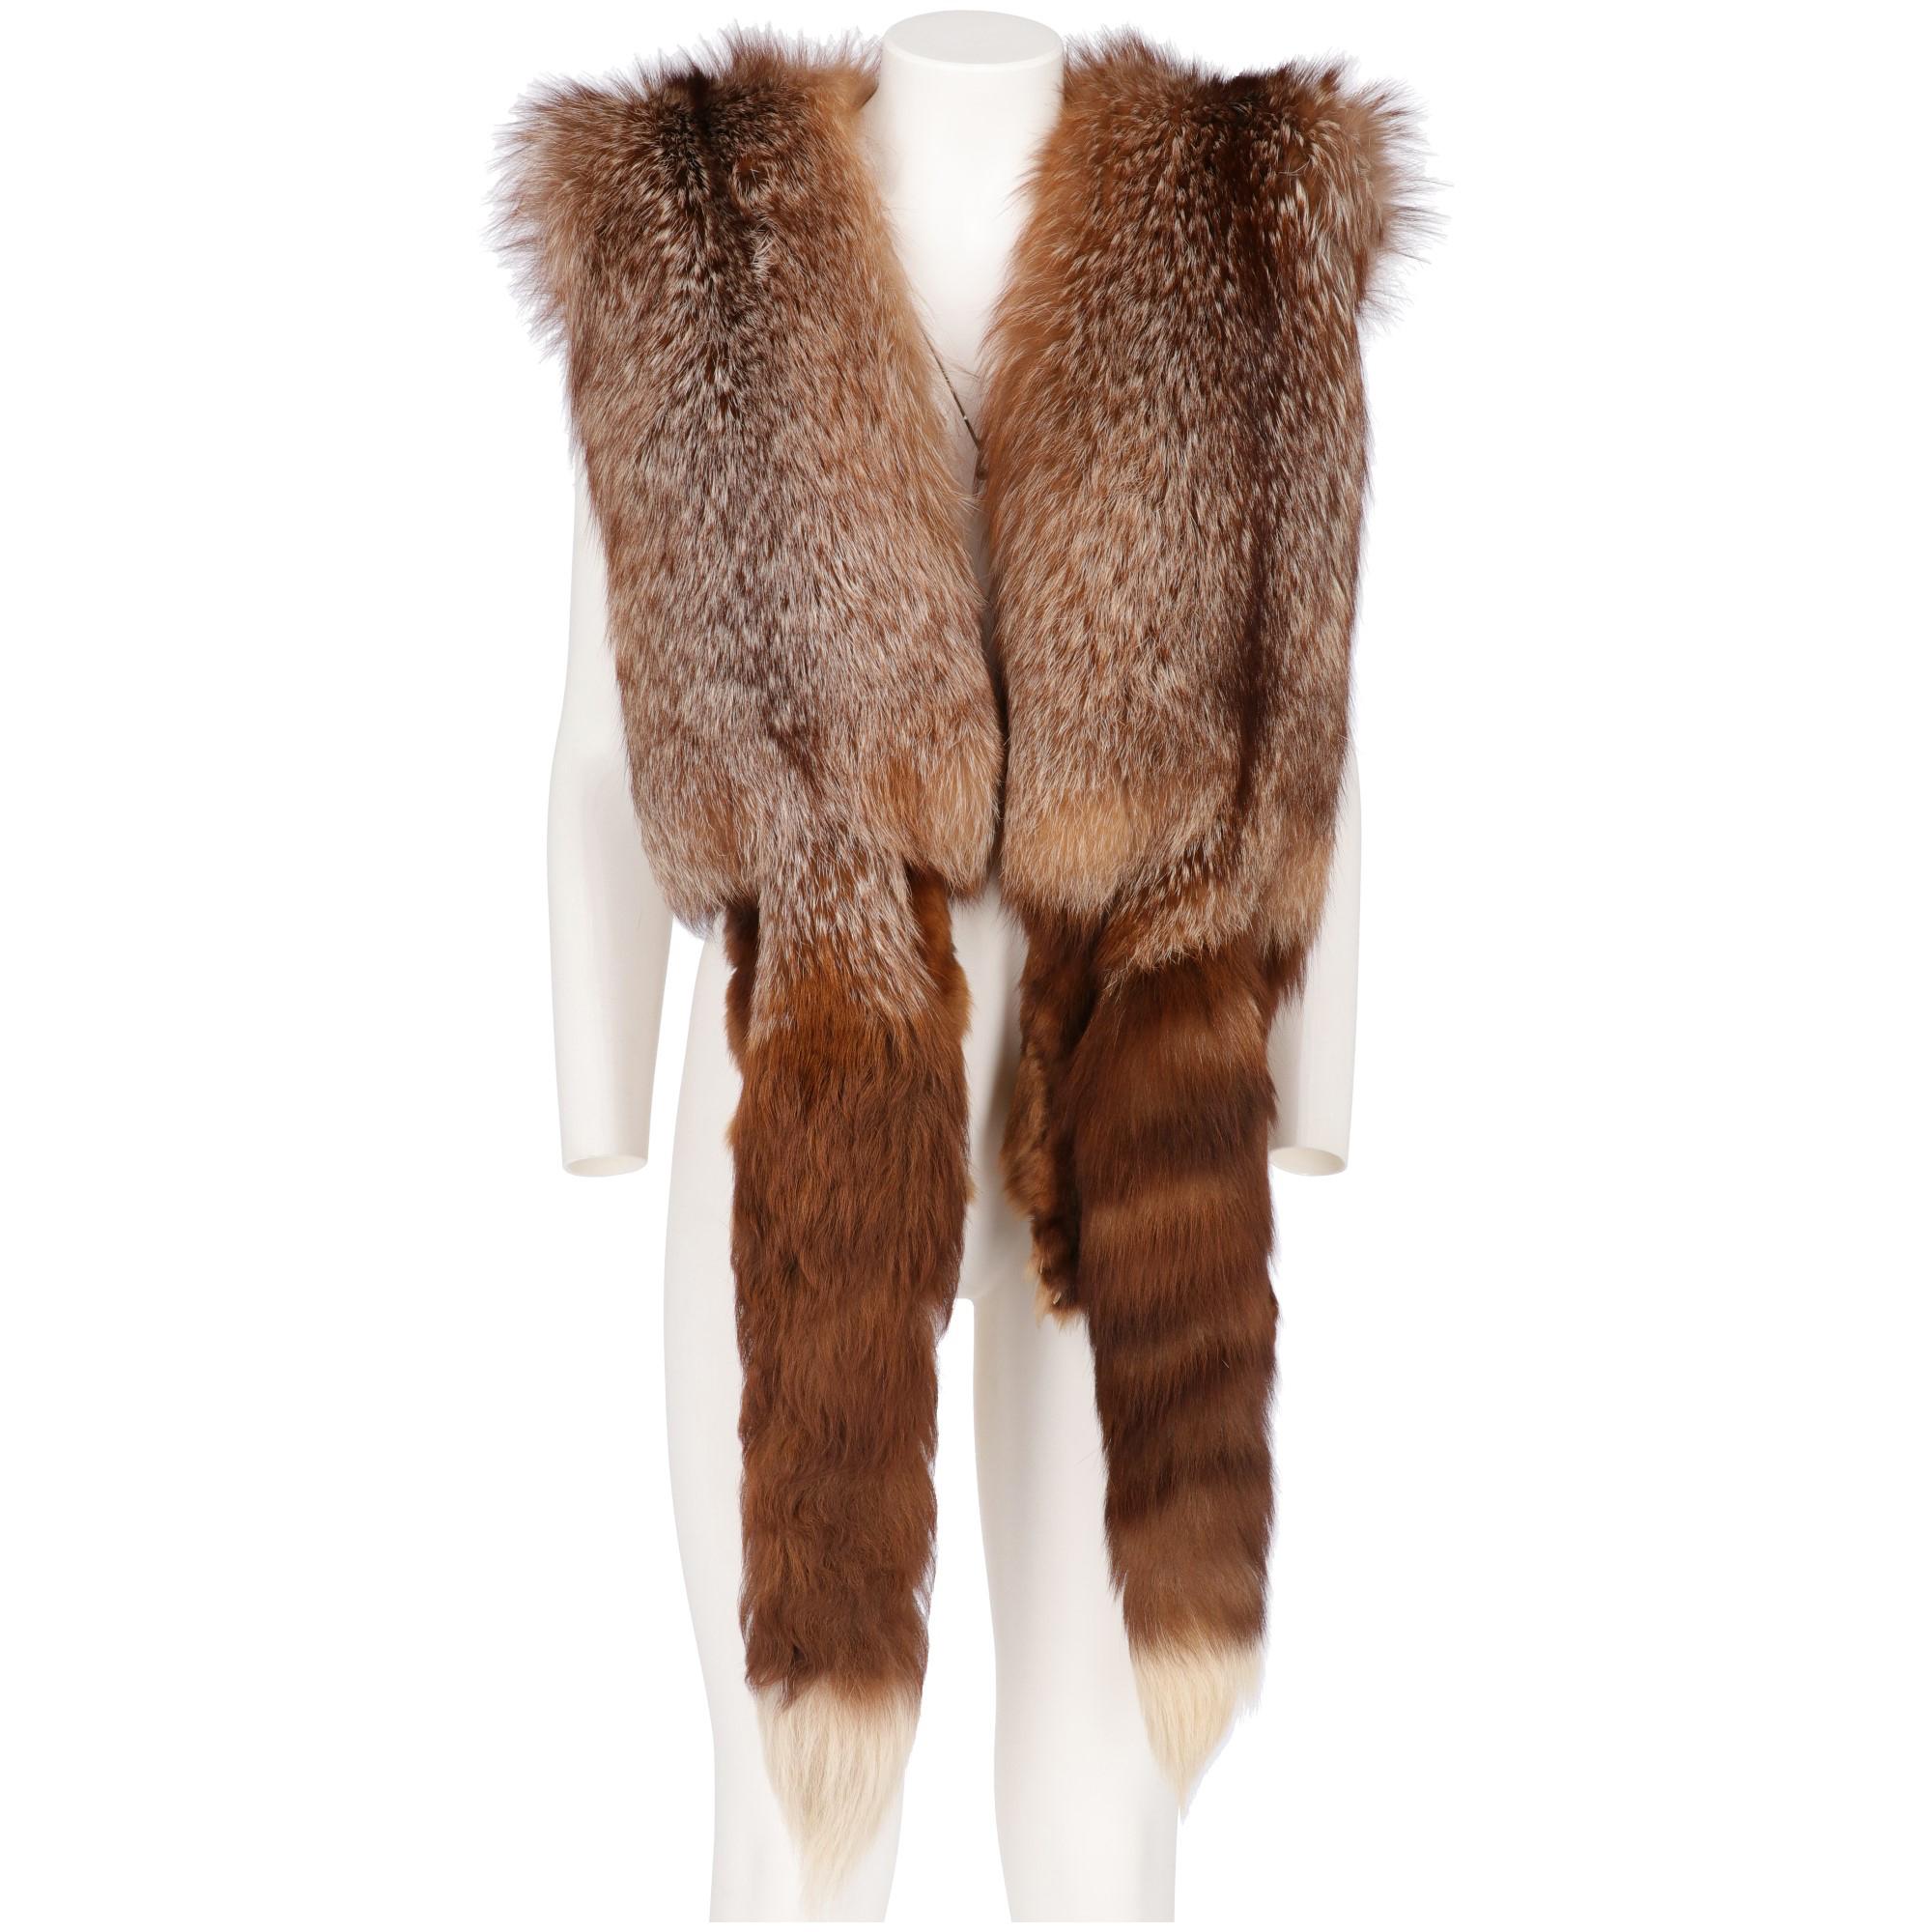 G. Balzani scarf in real fox fur, made of two whole fox joined together, with tails at the ends, muzzles and paws, with brown silk lining. Made in Italy, in perfect conditions.

Please note this item cannot be shipped outside the European